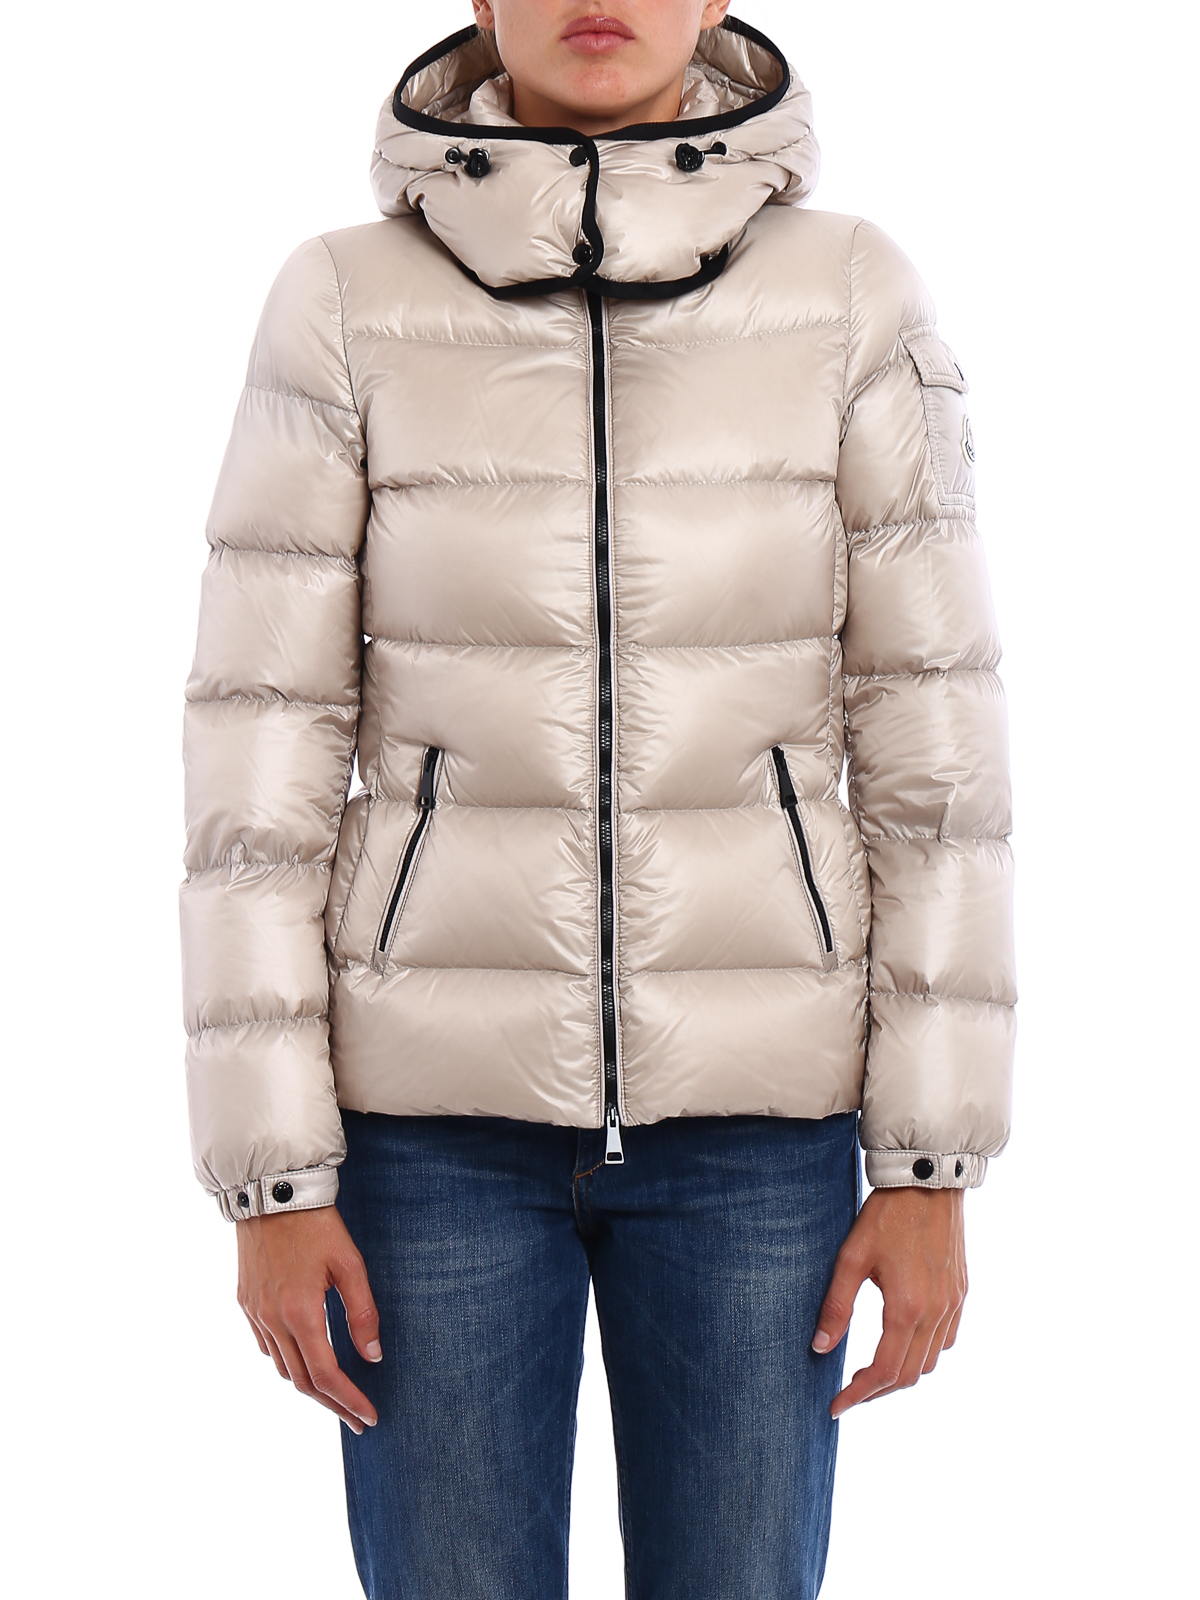 moncler for skiing